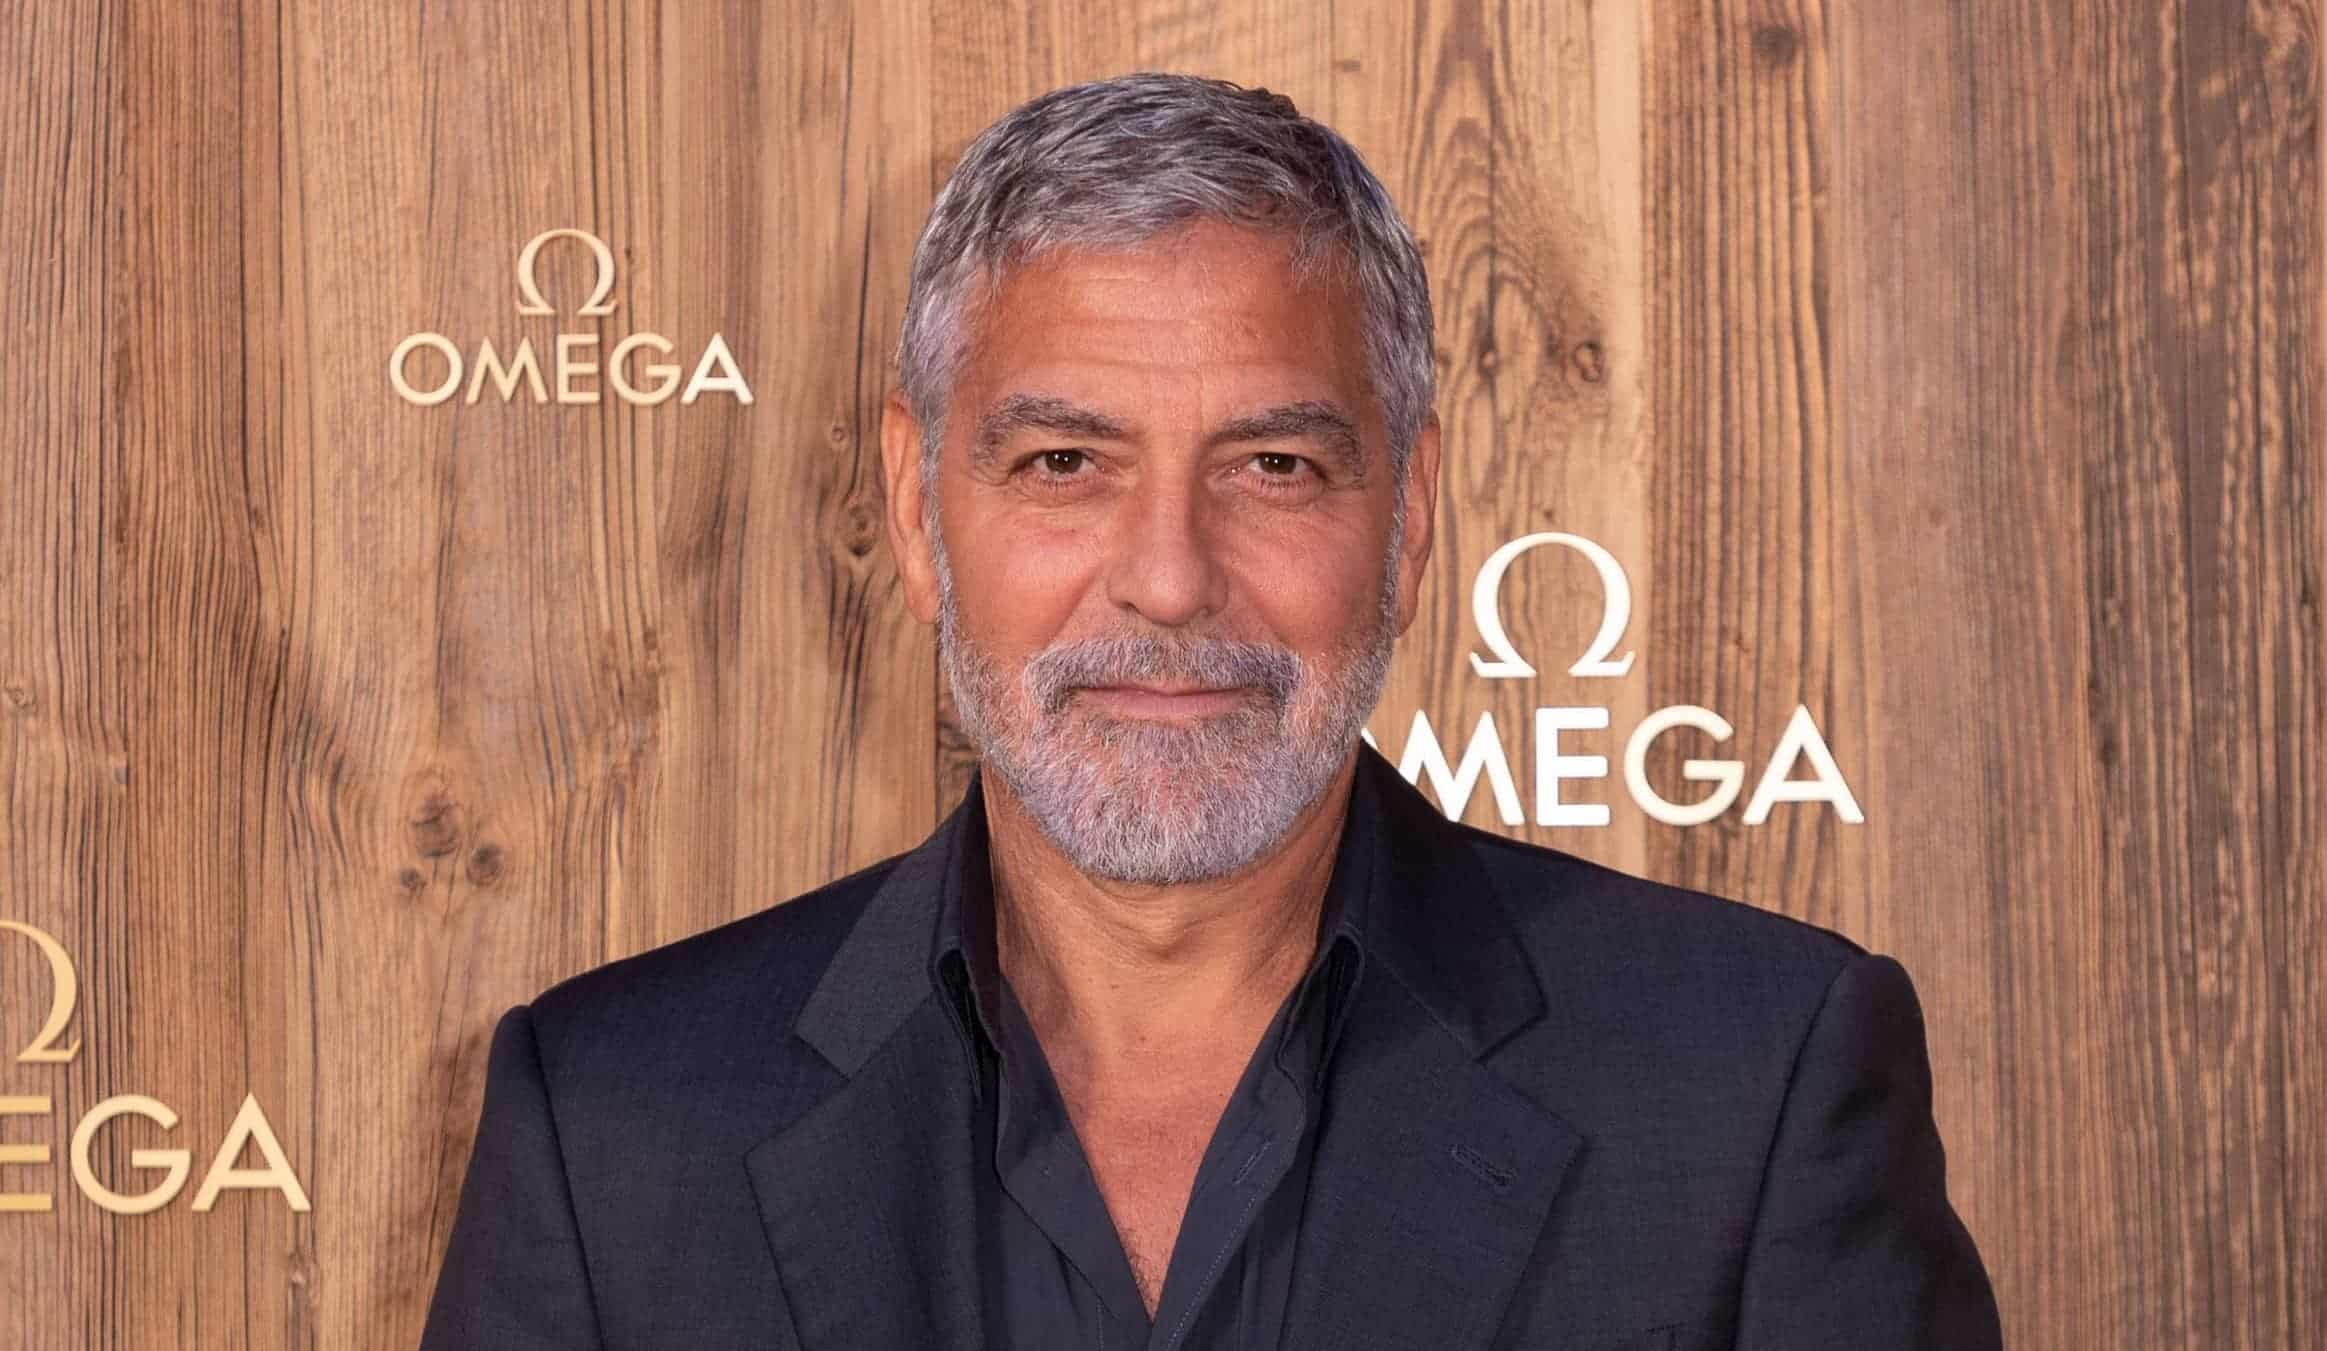 George clooney at omega masters